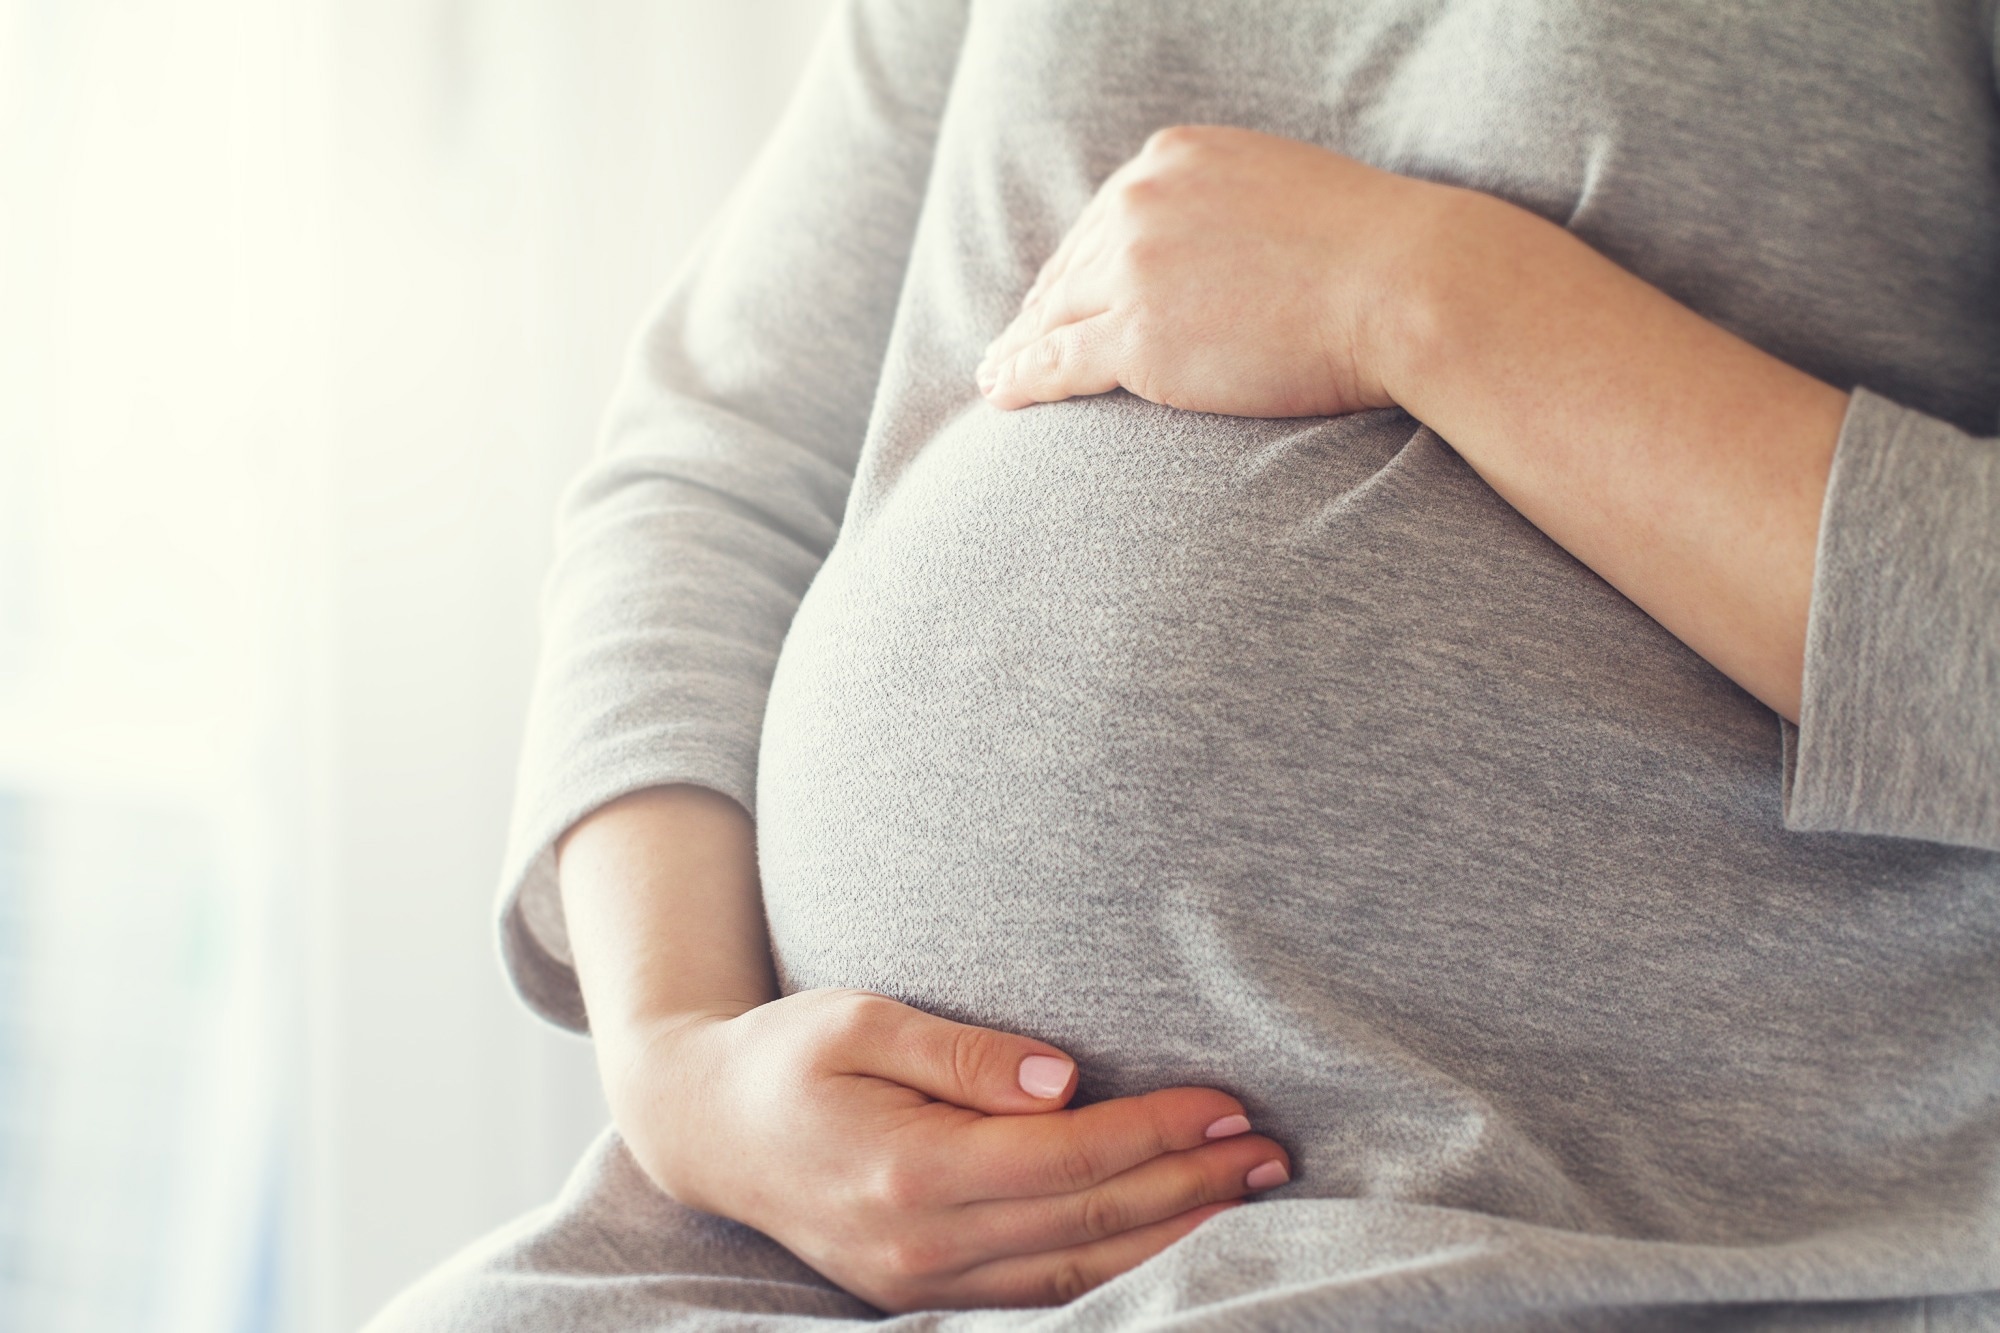 Study: Association of Mandatory Warning Signs for Cannabis Use During Pregnancy With Cannabis Use Beliefs and Behaviors. Image Credit: nerudol/Shutterstock.com